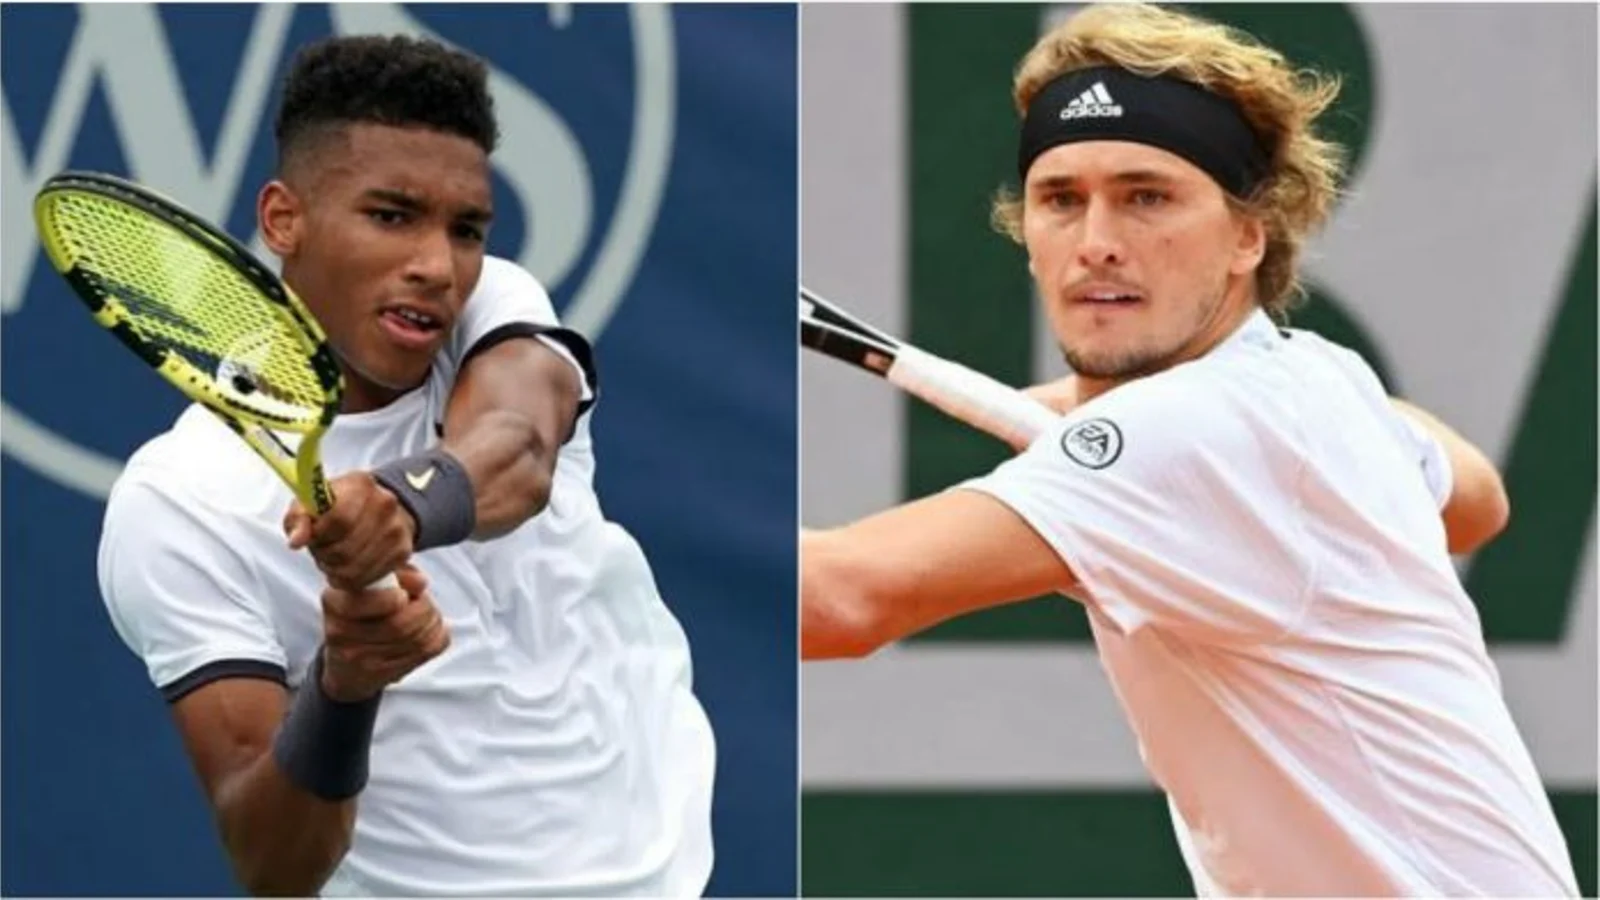 Félix Auger-Aliassime vs Alexander Zverev Prediction, Head-to-head, Preview, Betting Tips and Live Stream